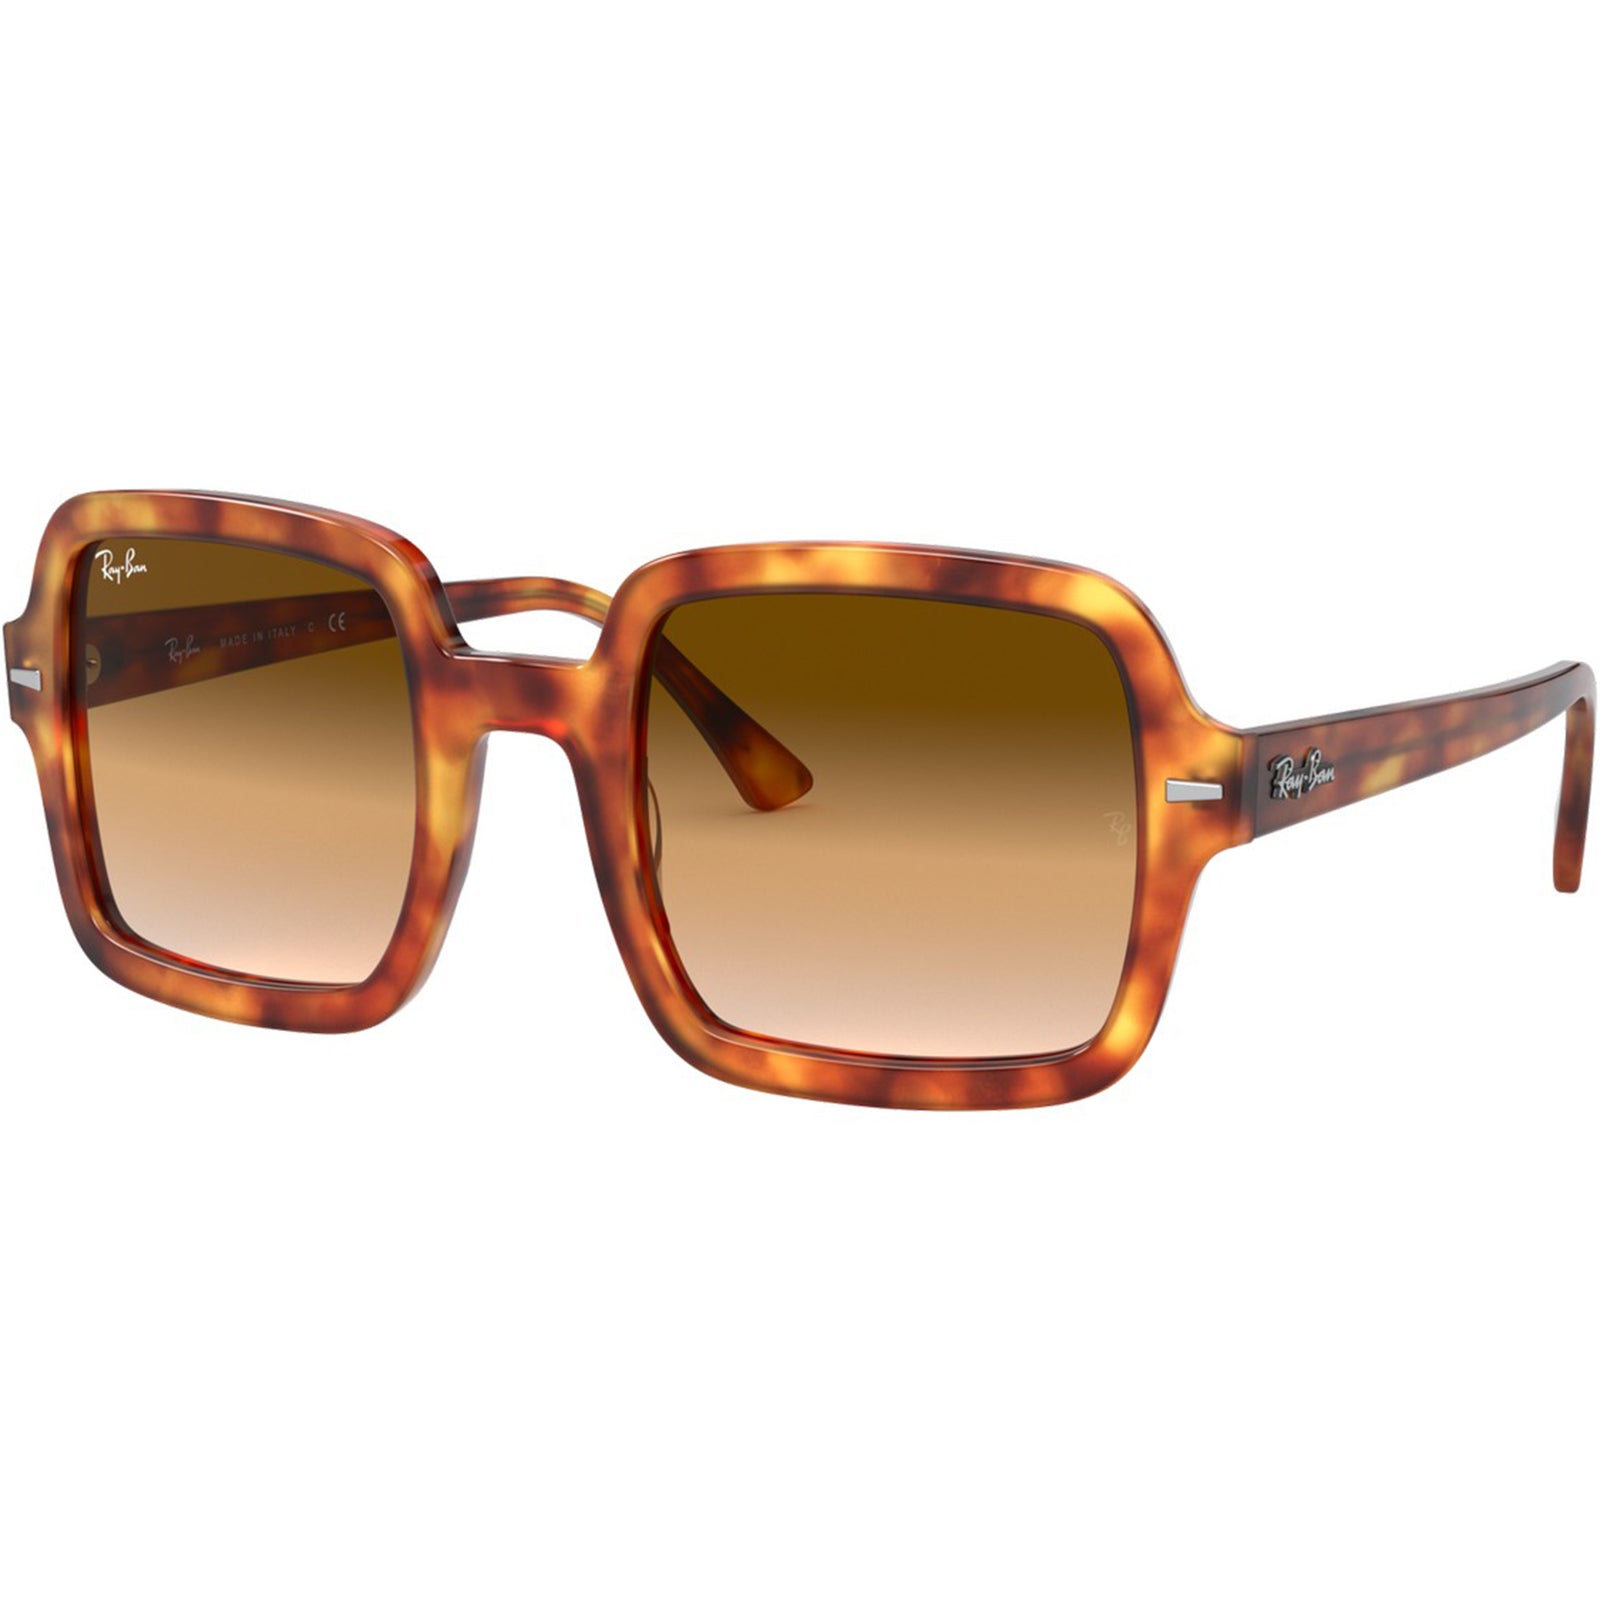 Ray-Ban RB2188 Women's Lifestyle Sunglasses-0RB2188